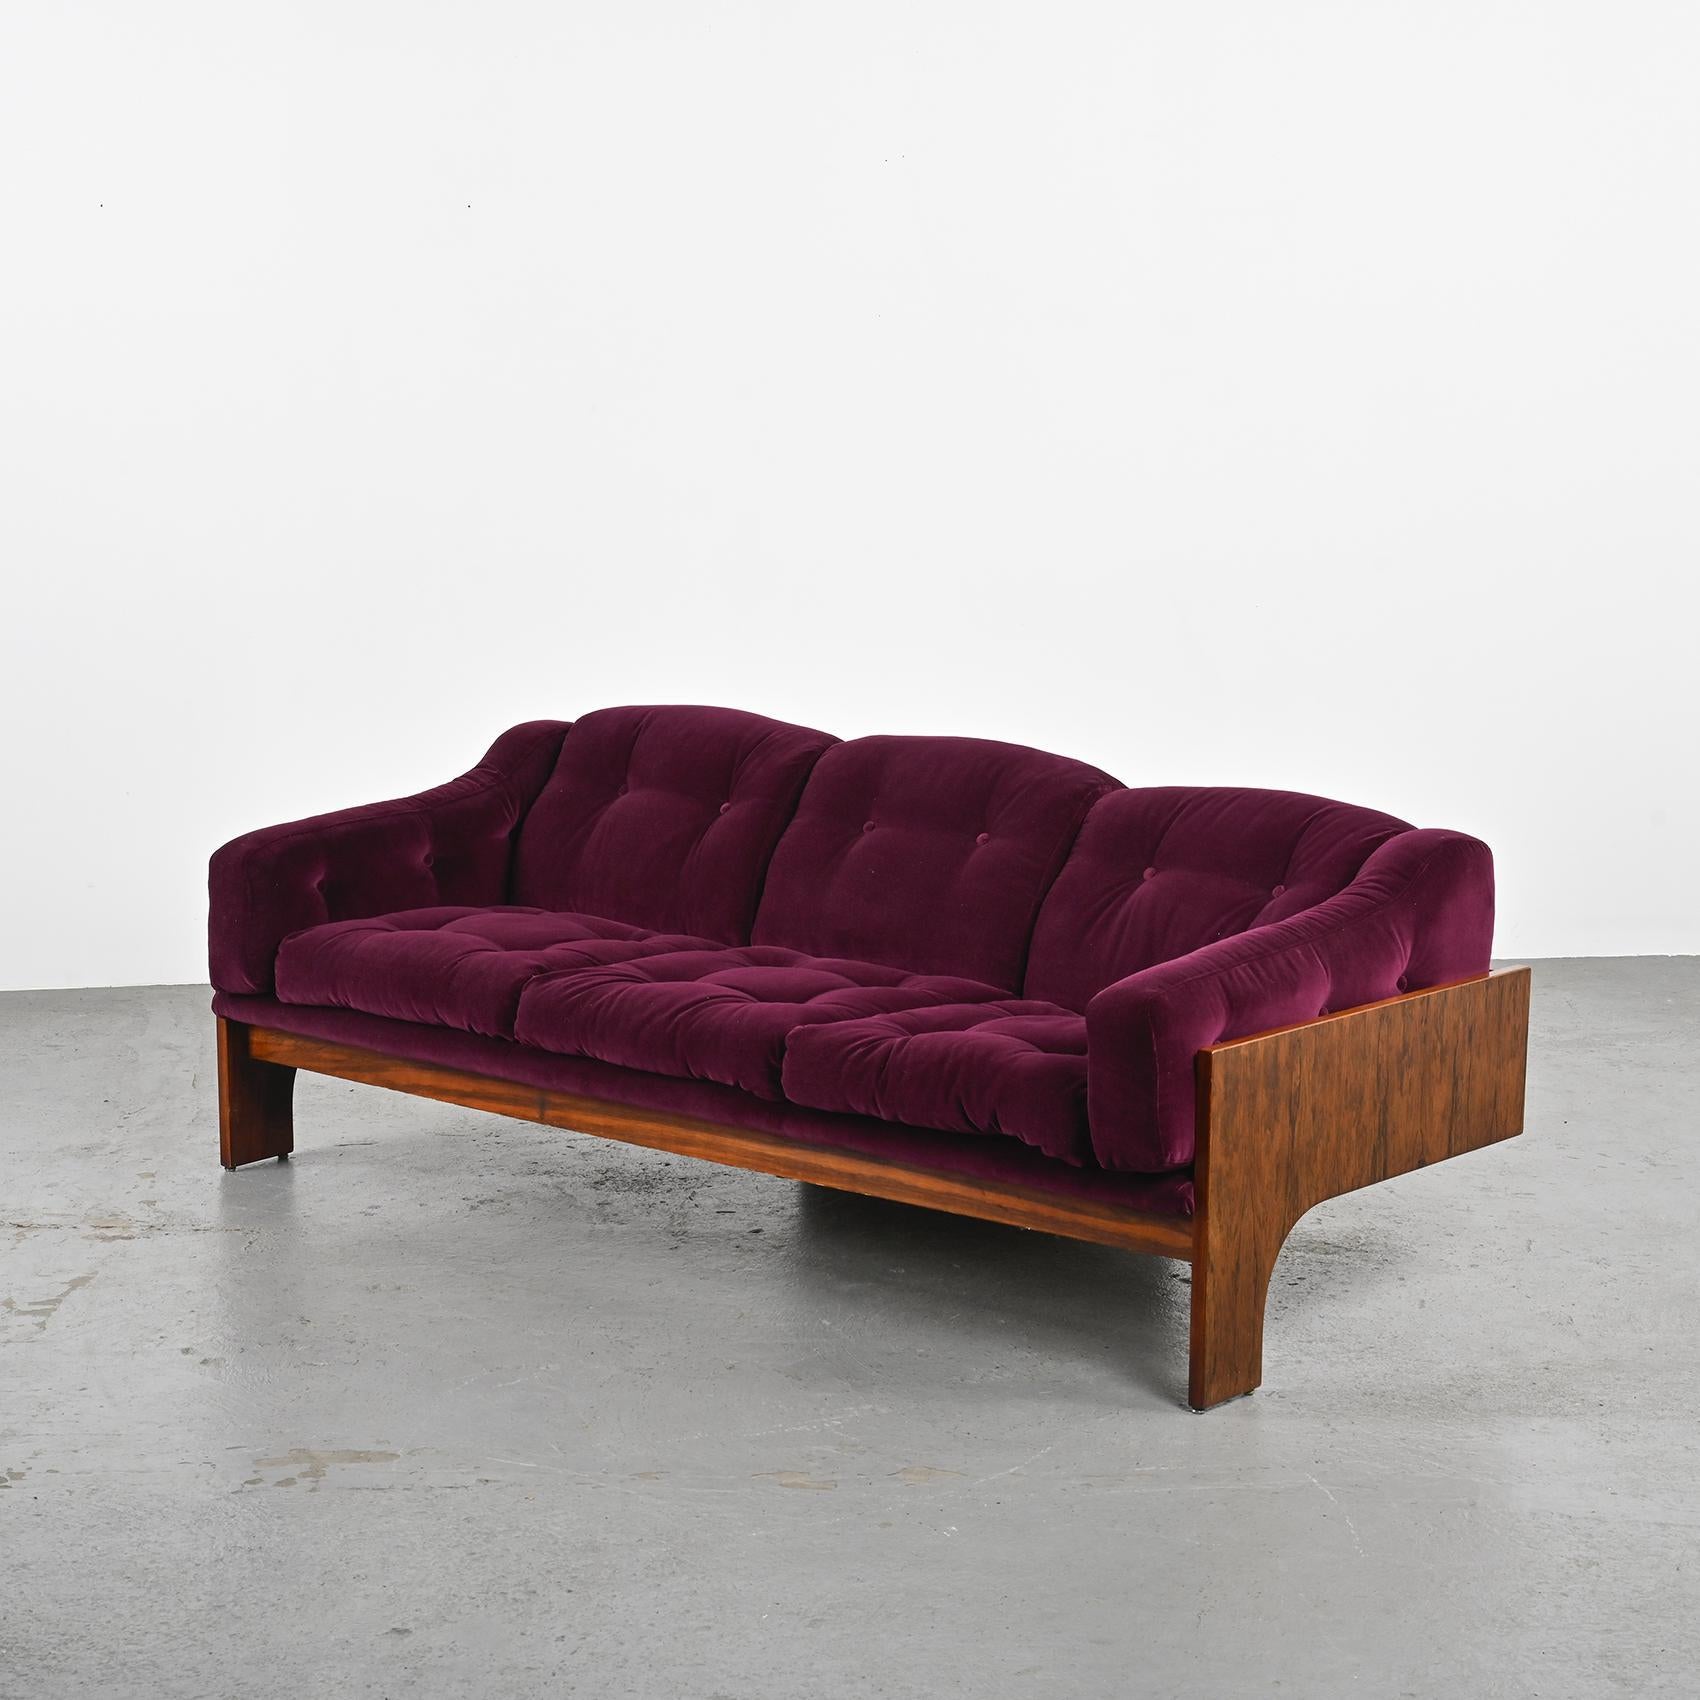 The Oriolo sofa, designed by Claudio Salocchi, is an iconic piece of Italian design furniture. Created in the 1960s, this sofa stands out with its bold lines and offers exceptional comfort with its enveloping armrests and padded back.

The Oriolo